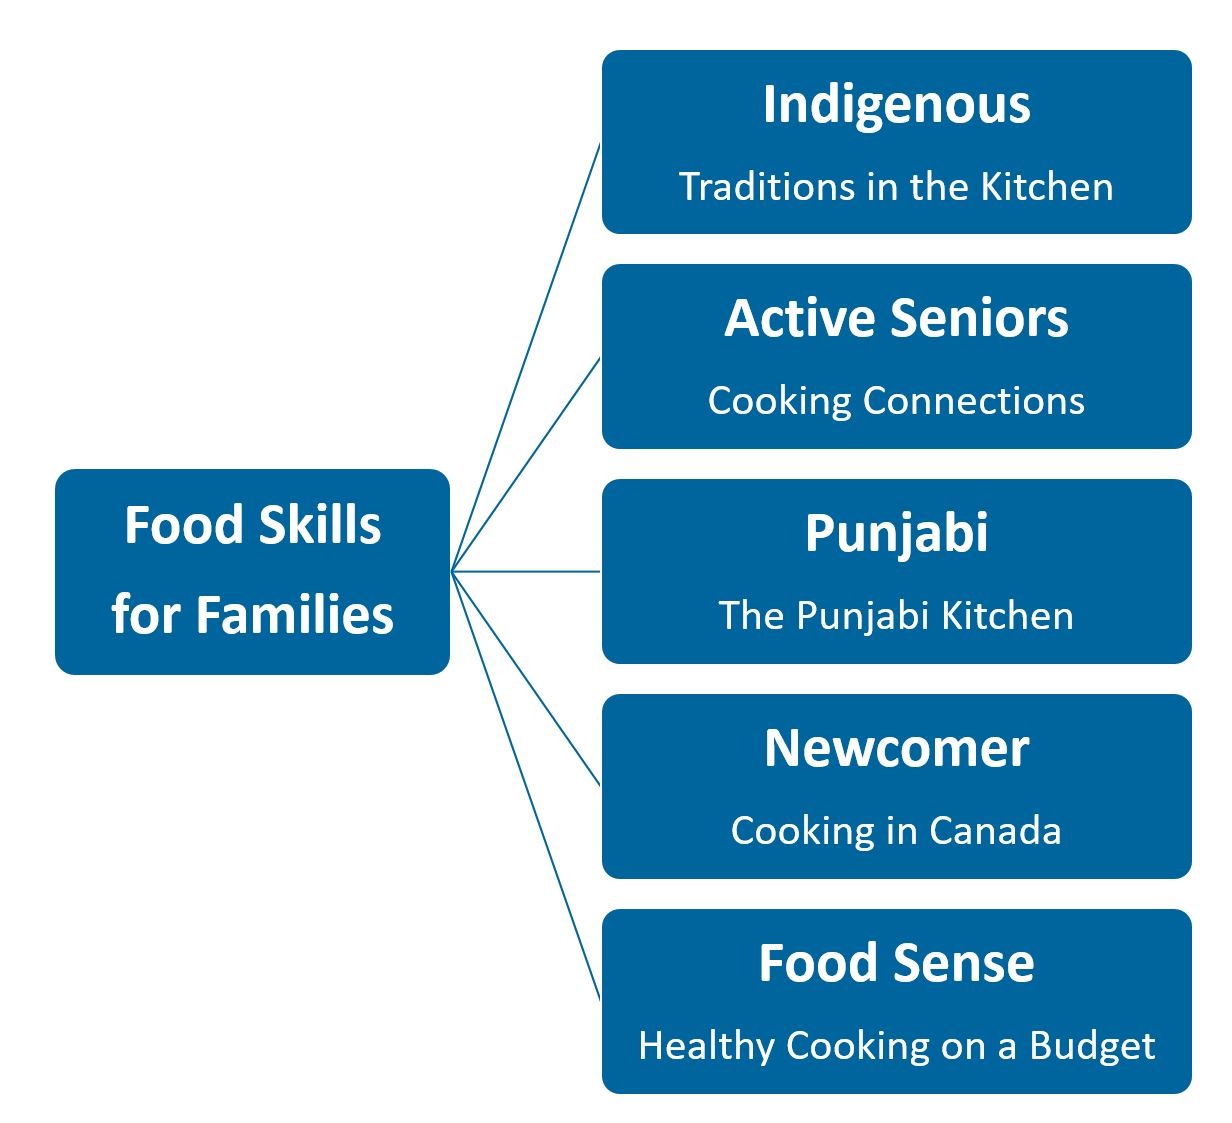 The five programs are Indigenous, Active Seniors, Punjabi, Newcomers and Food Sense